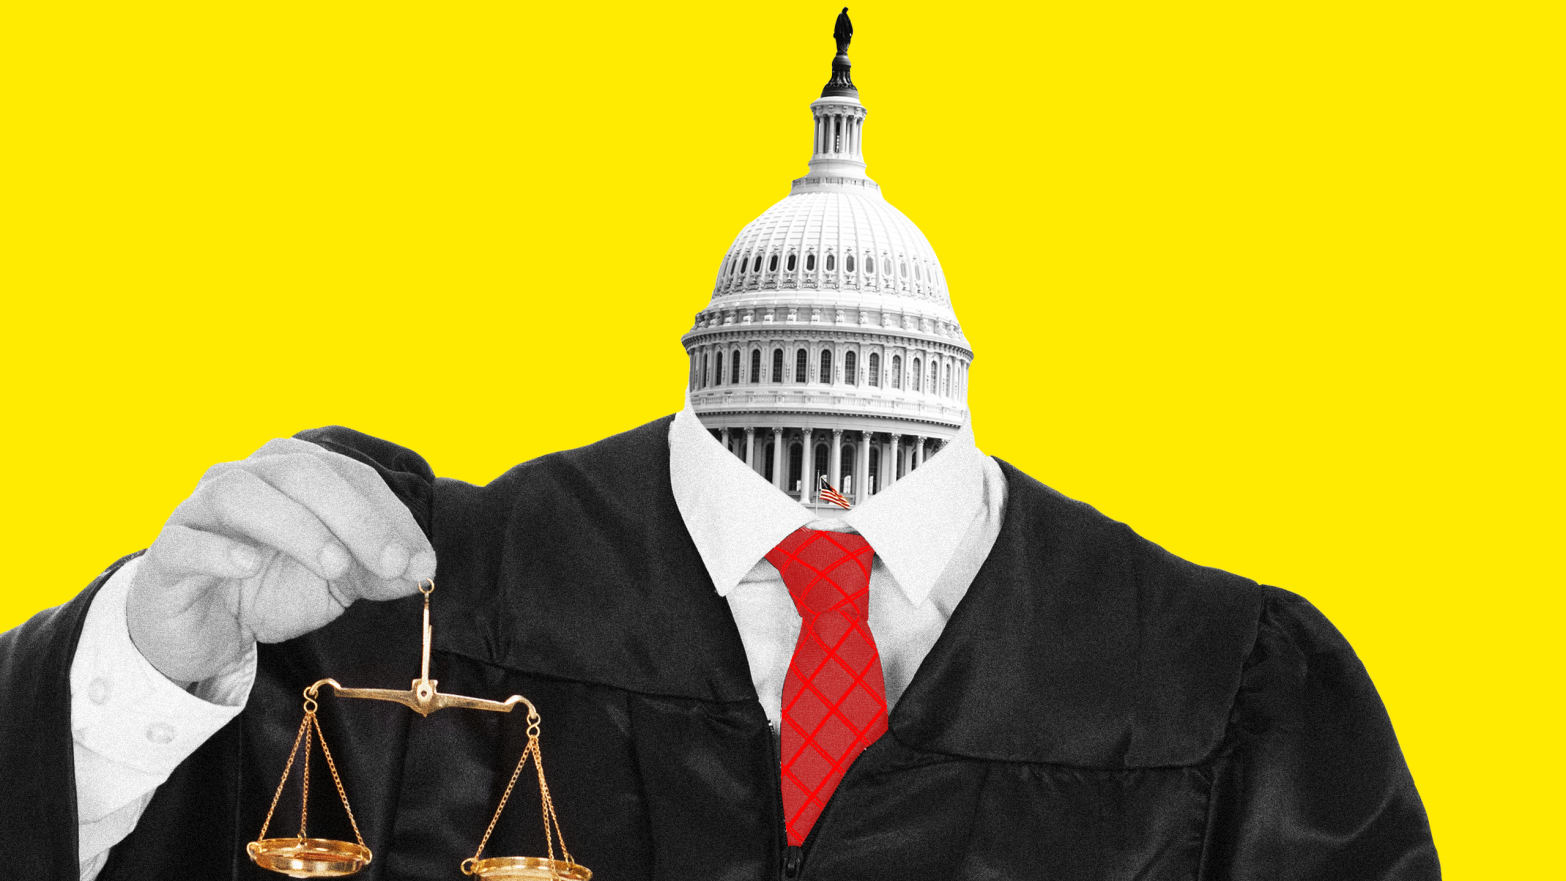 While You Weren't Looking the Senate Has Been Rubber Stamping Trump’s Extreme Judicial Picks